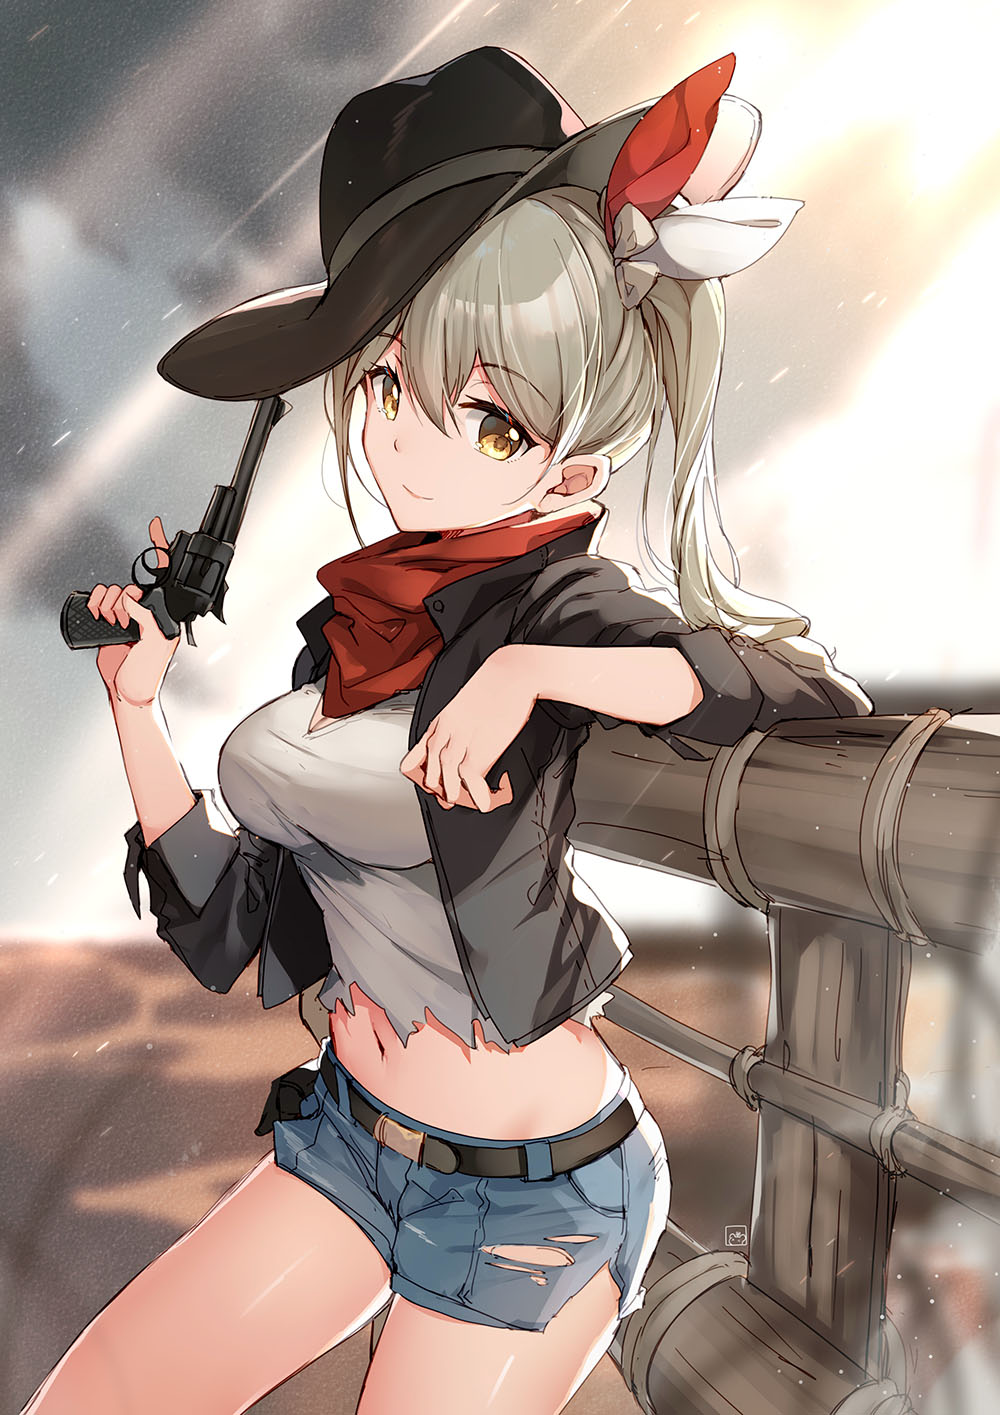 Anime 1000x1415 anime anime girls digital art artwork 2D portrait display revolver gun yellow eyes scarf torn clothes short shorts jean shorts belly cowboy hats gray hair side ponytail looking at viewer cowgirl bison cangshu